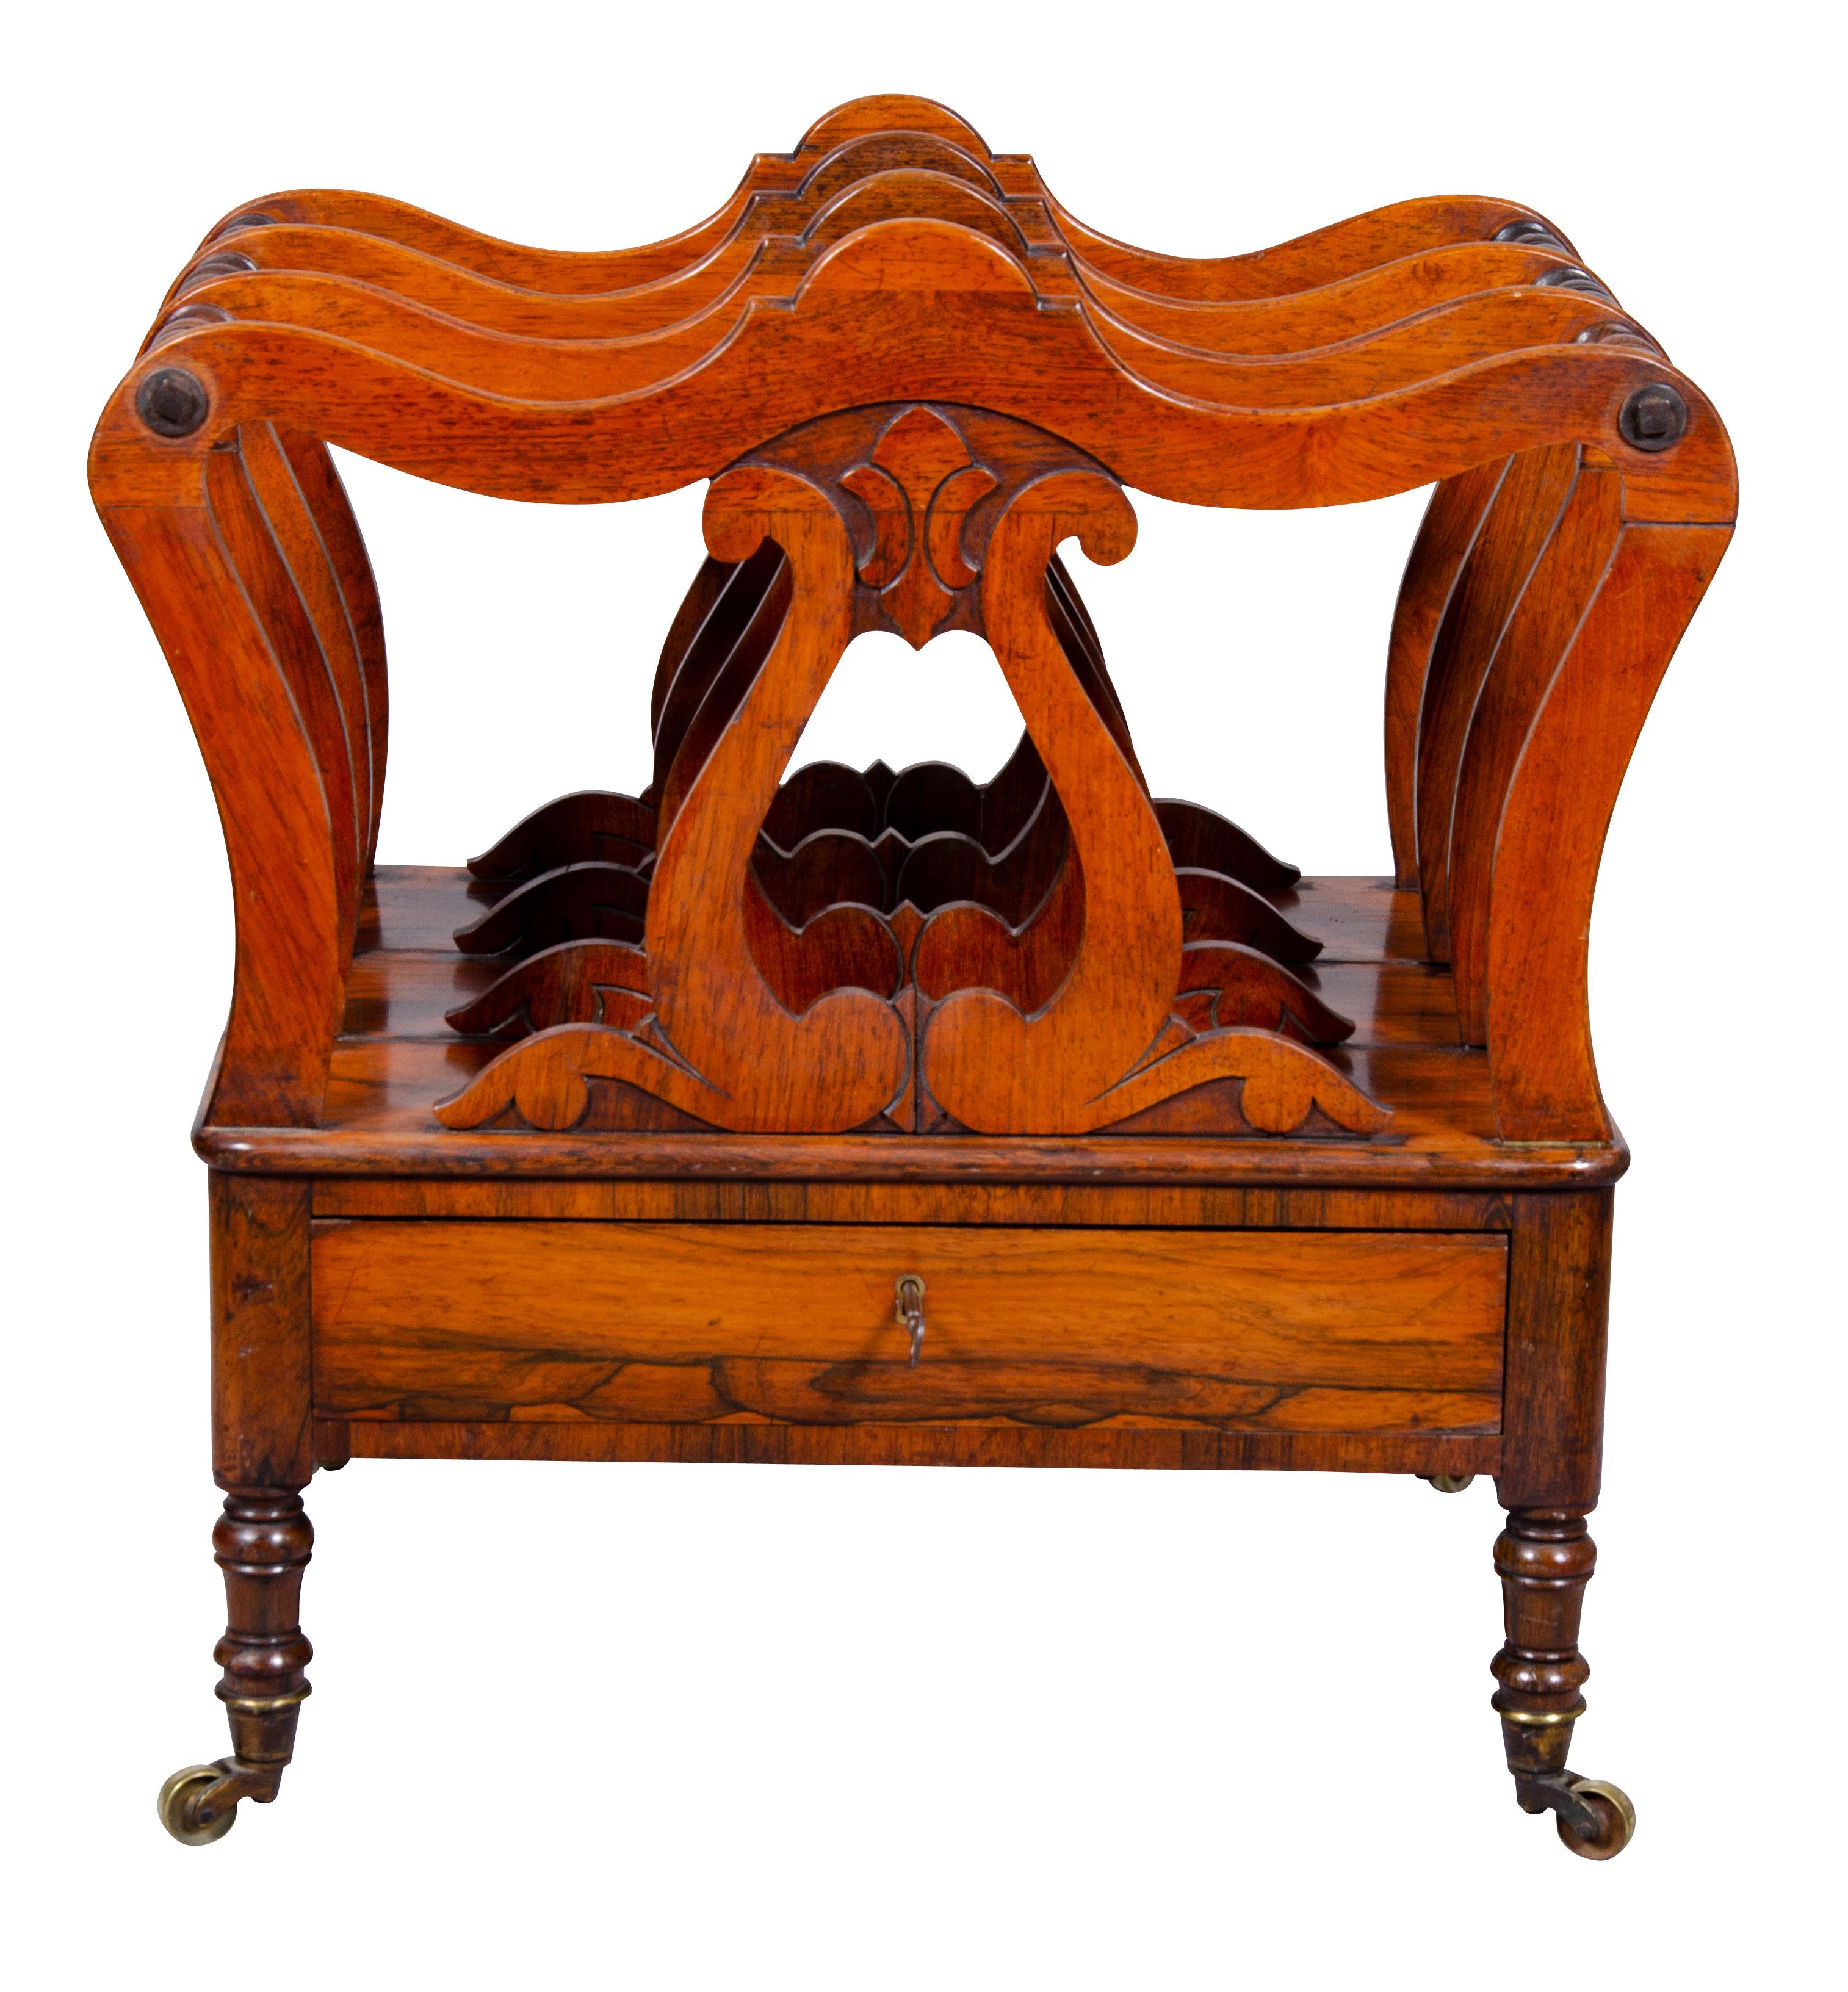 Very finely made likely by Gillow. Using finely figured rosewood. The drawer finely constructed including a key. Unusual form transitioning from the classical Regency to Victorian.